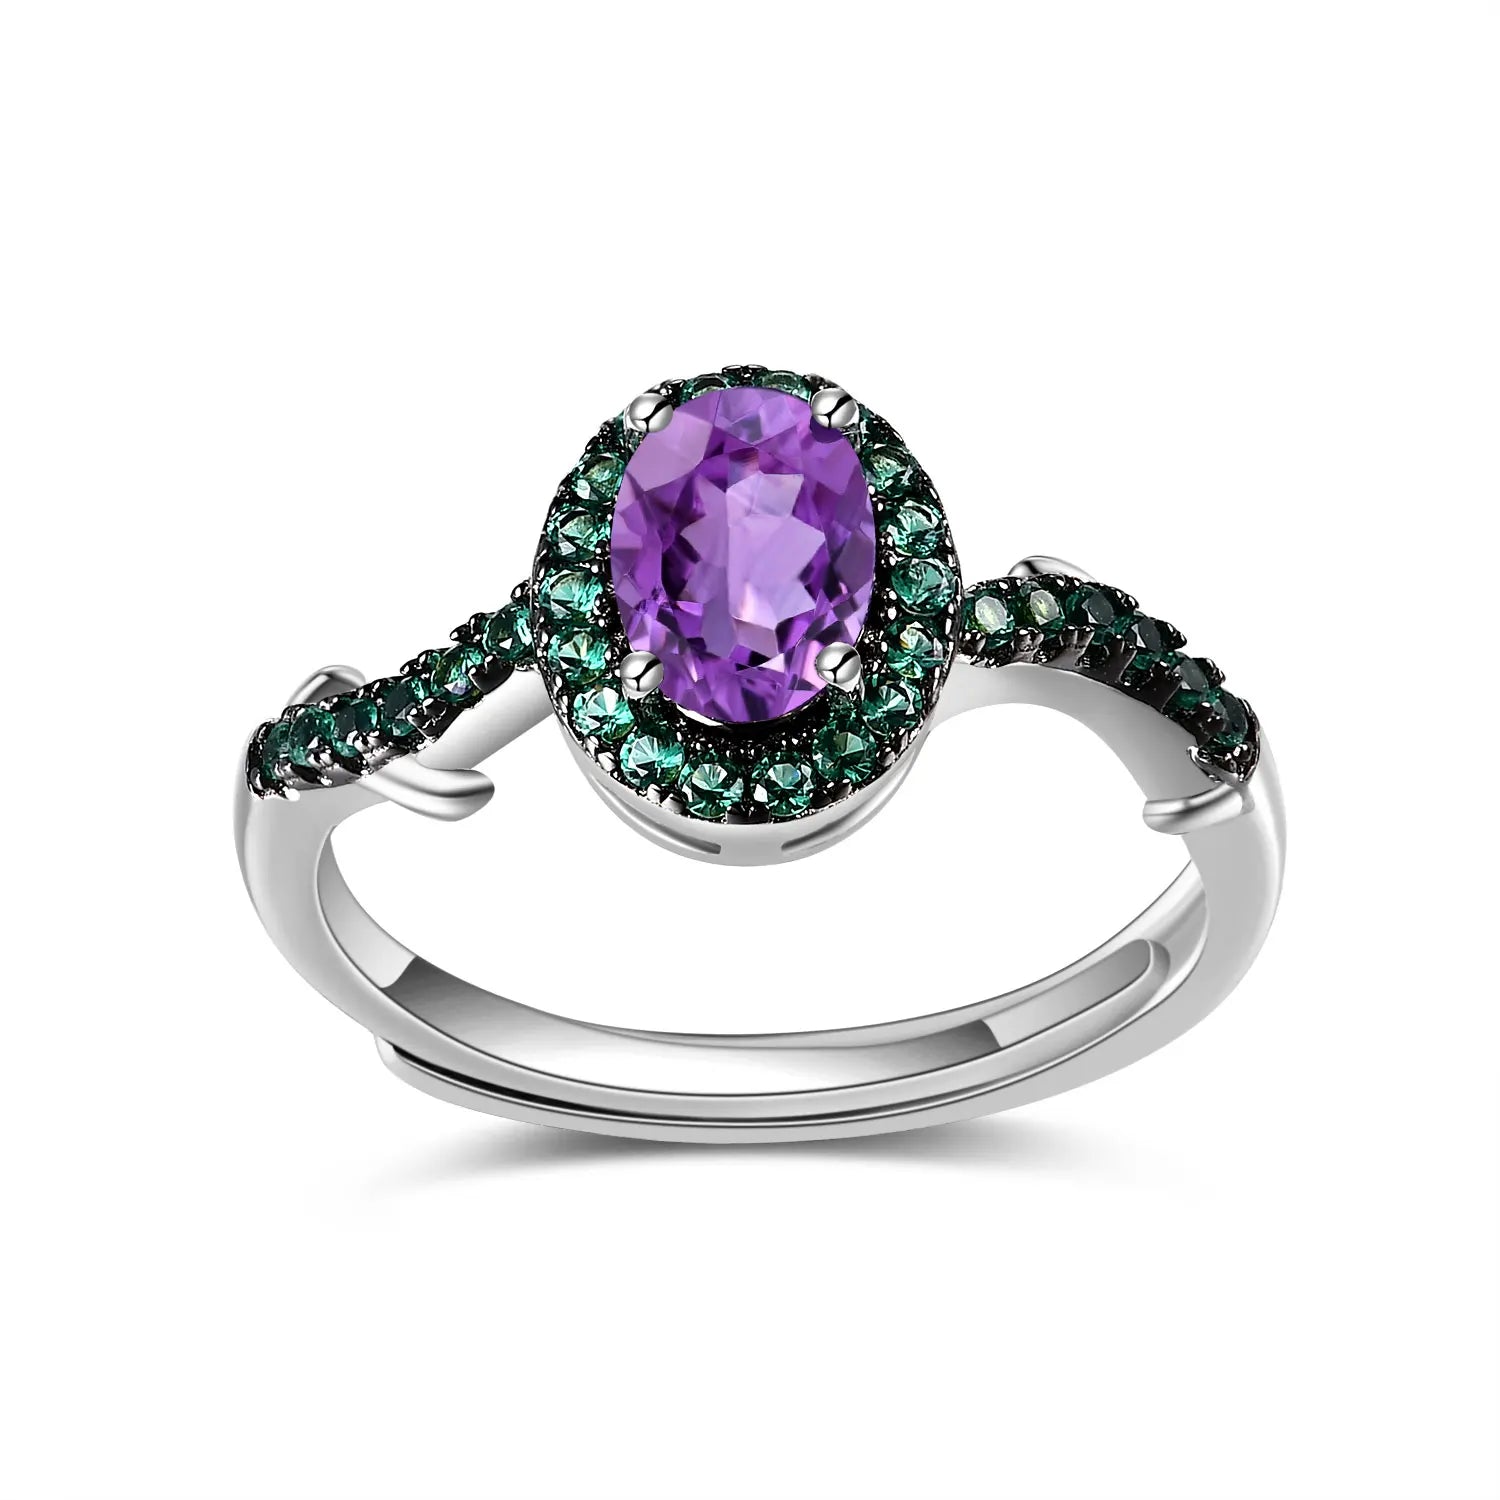 GEM'S BALLET Design Kite Amethyst Brambles Gemstone Ring Sets for Women Solid 925 Sterling Silver Luxury Kite Wedding Jewelry resizable CHINA Amethyst | 925 Sterling Silver